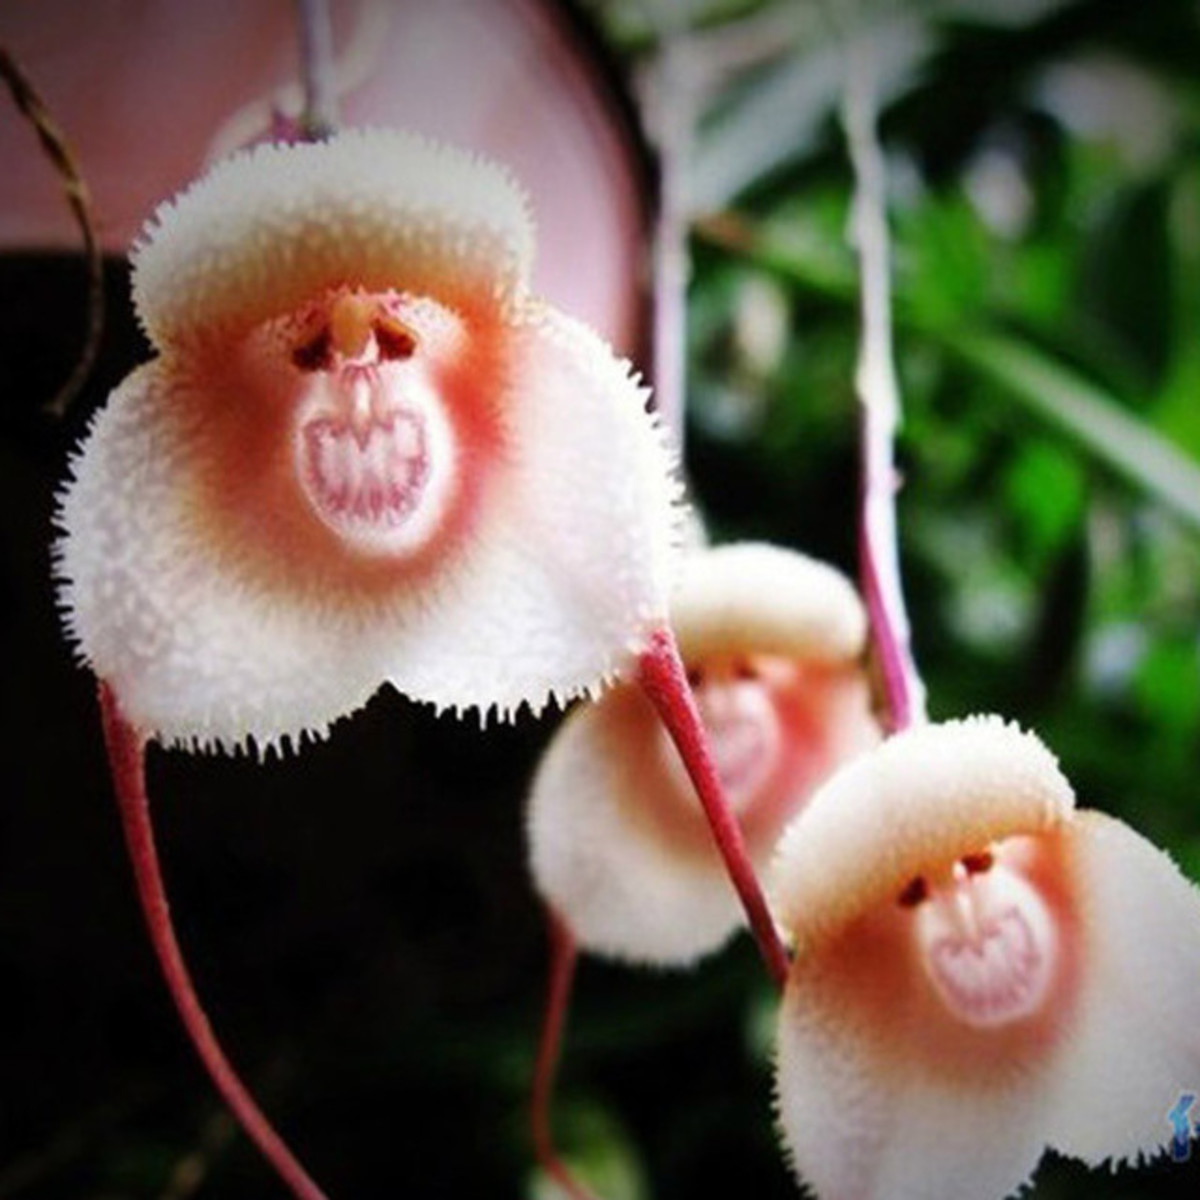 There are many varieties of monkey face orchids, and these photos represent a few of them.  If you are interested in them, contact someone with your local orchid society.